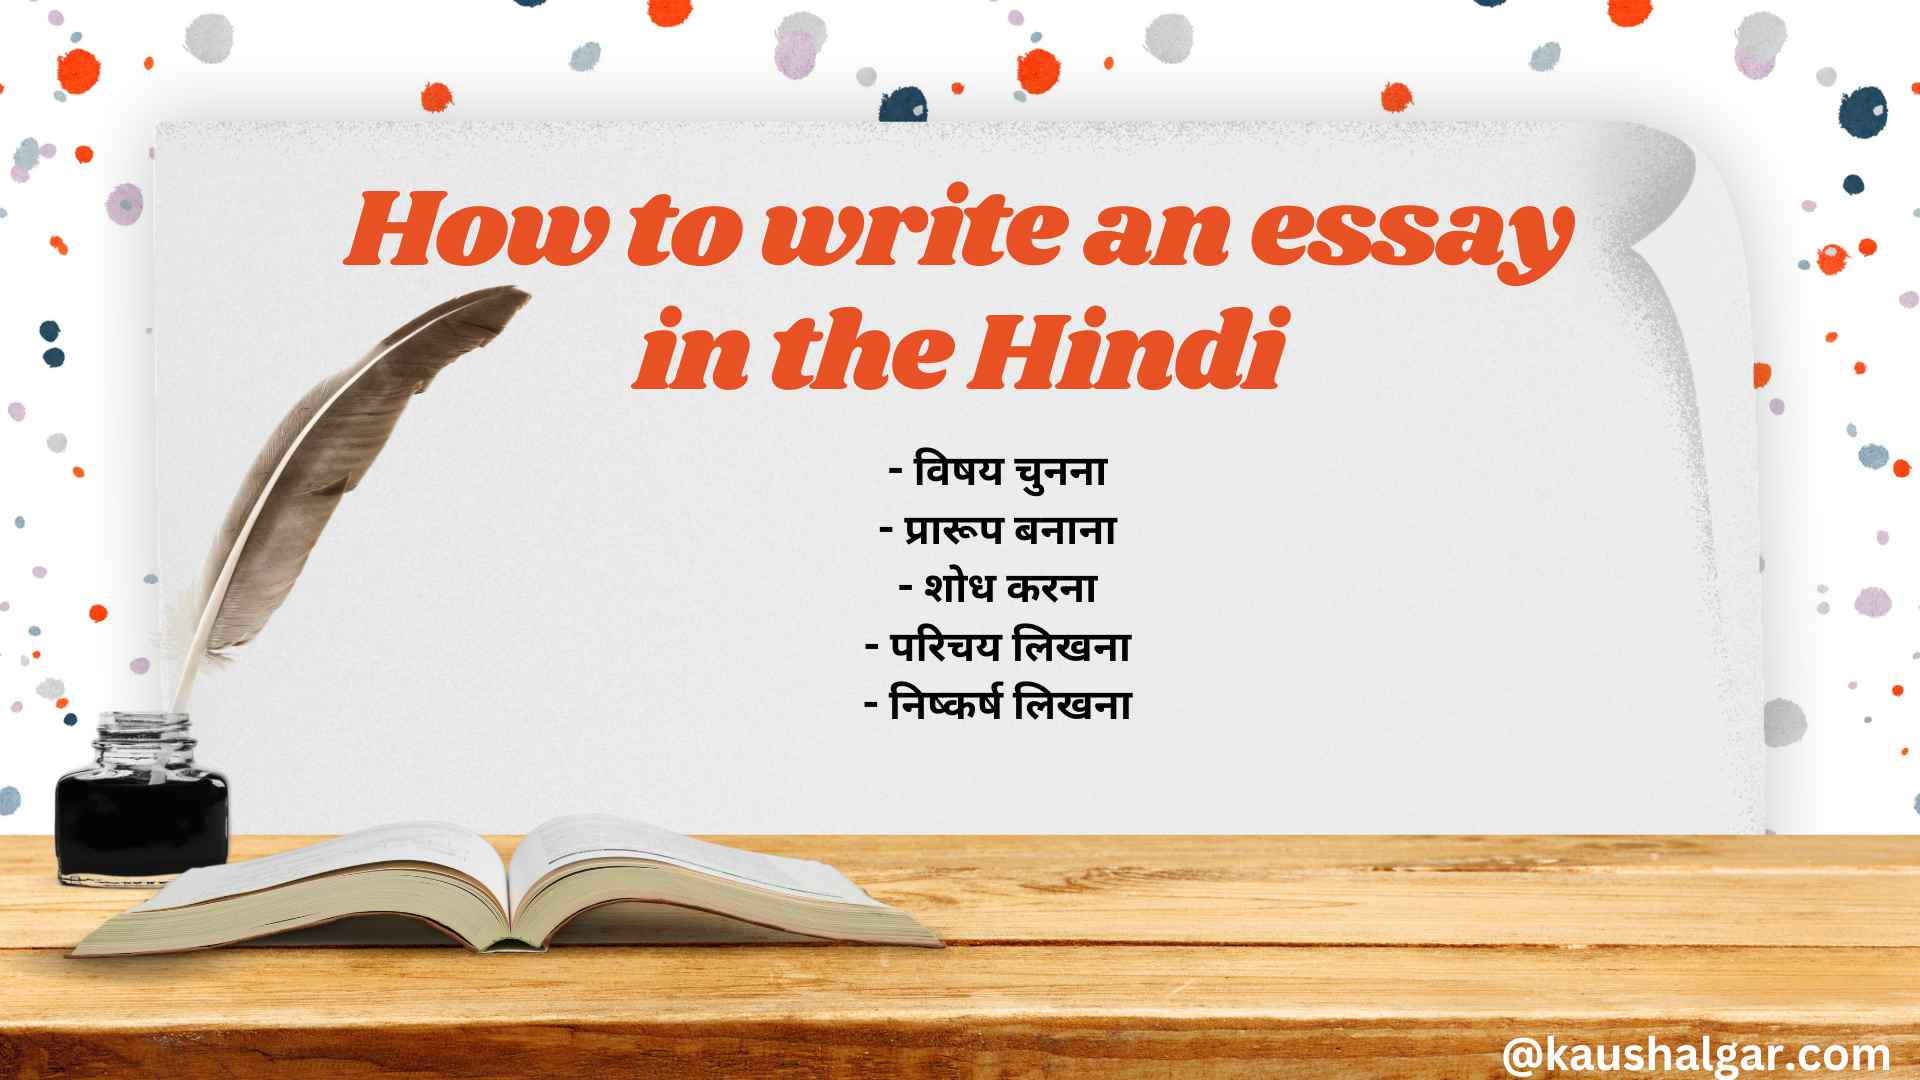 How to write an essay in Hindi.